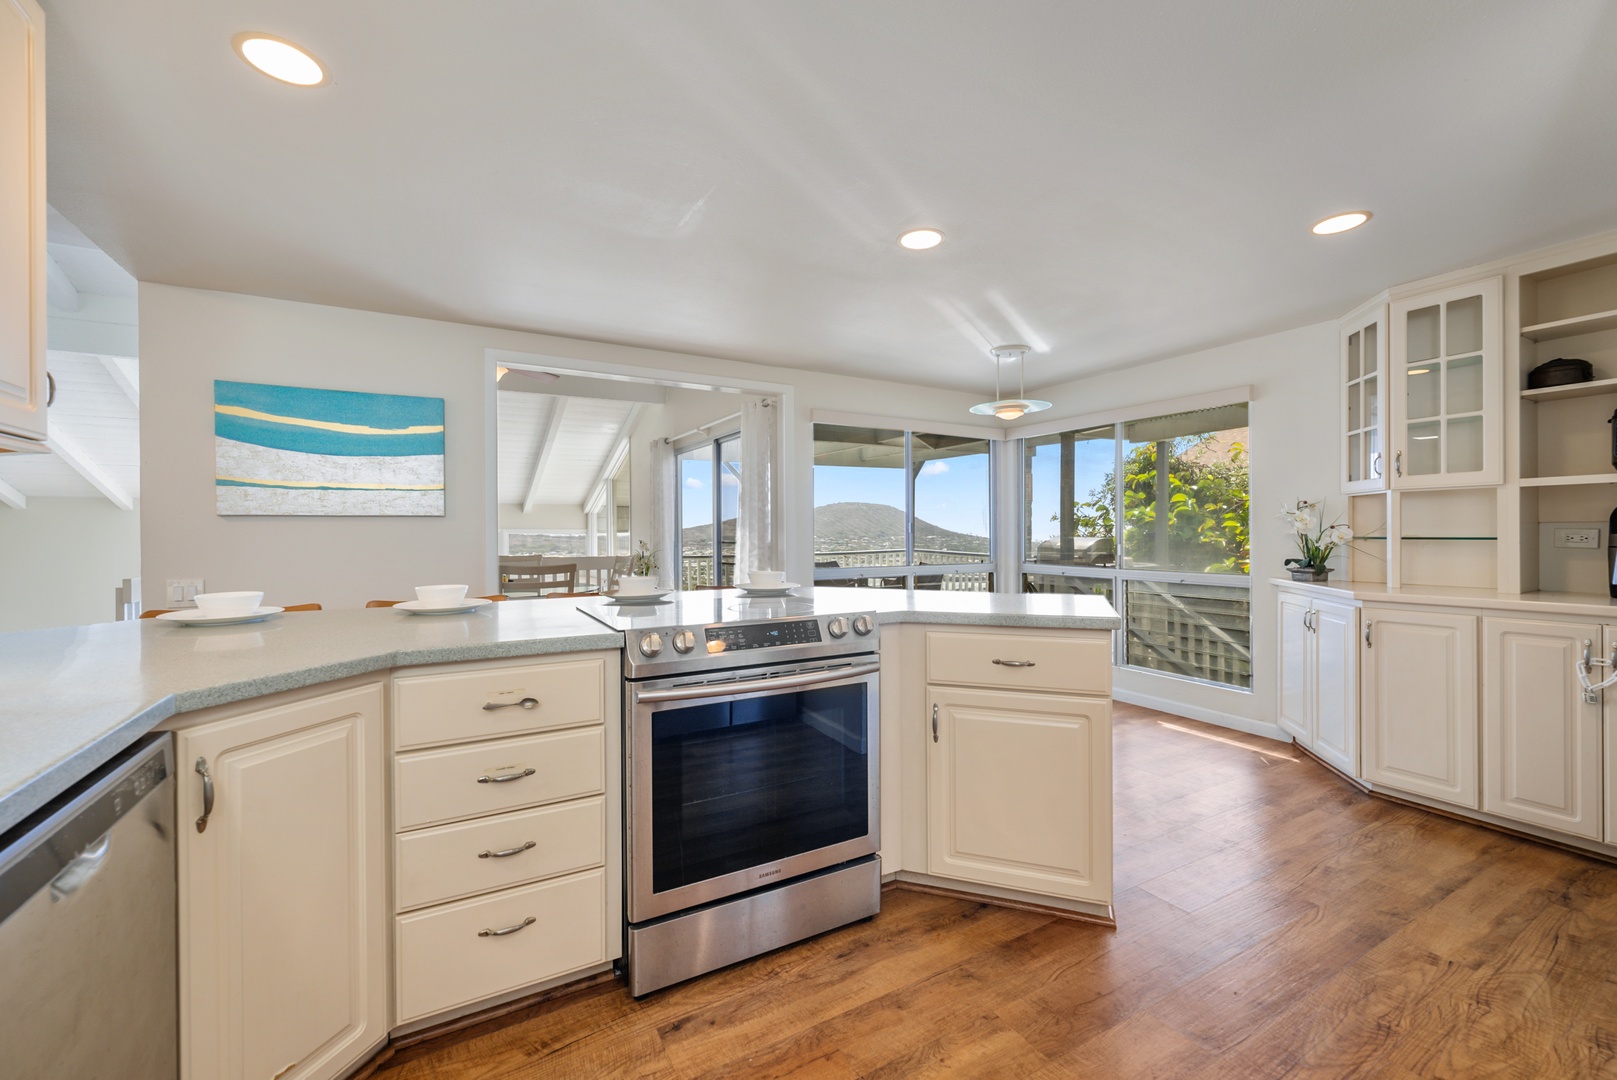 Fully equipped kitchen with large island